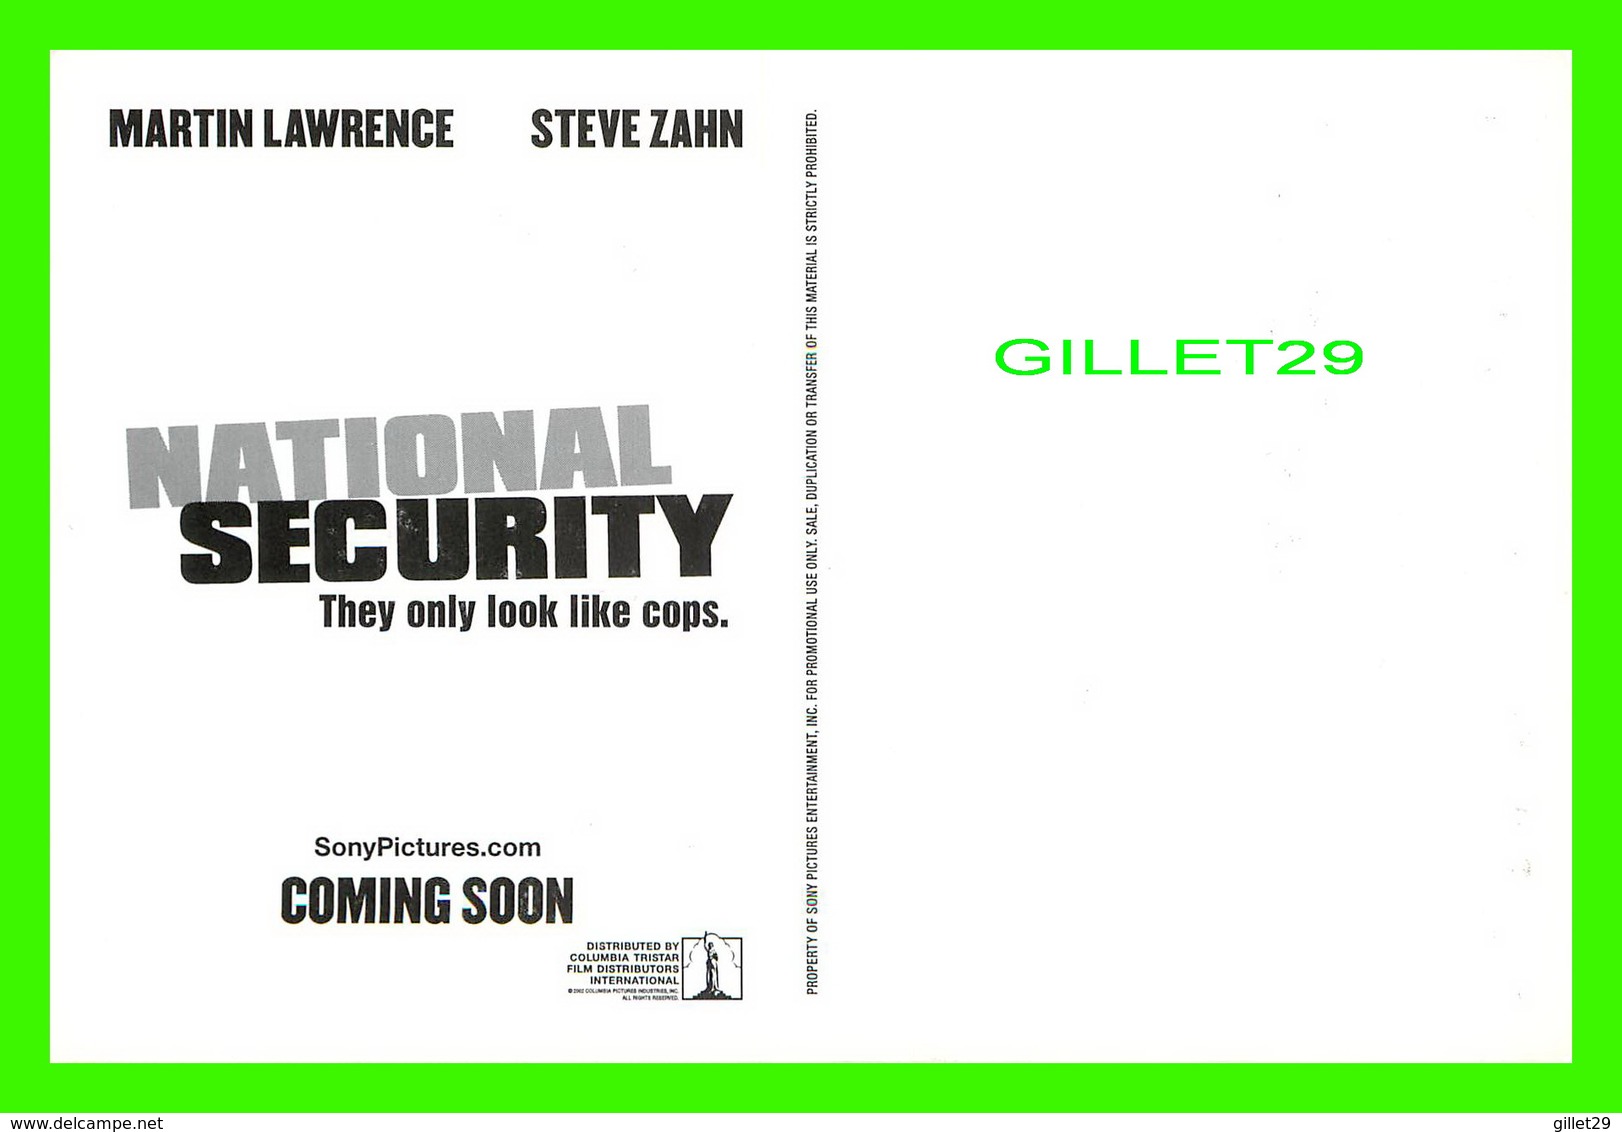 AFFICHES DE FILM - " NATIONAL SECURITY " - FILM BY DENNIS DUGAN IN 2003  WITH MARTIN LAWRENCE & STEVE ZAHN - - Affiches Sur Carte